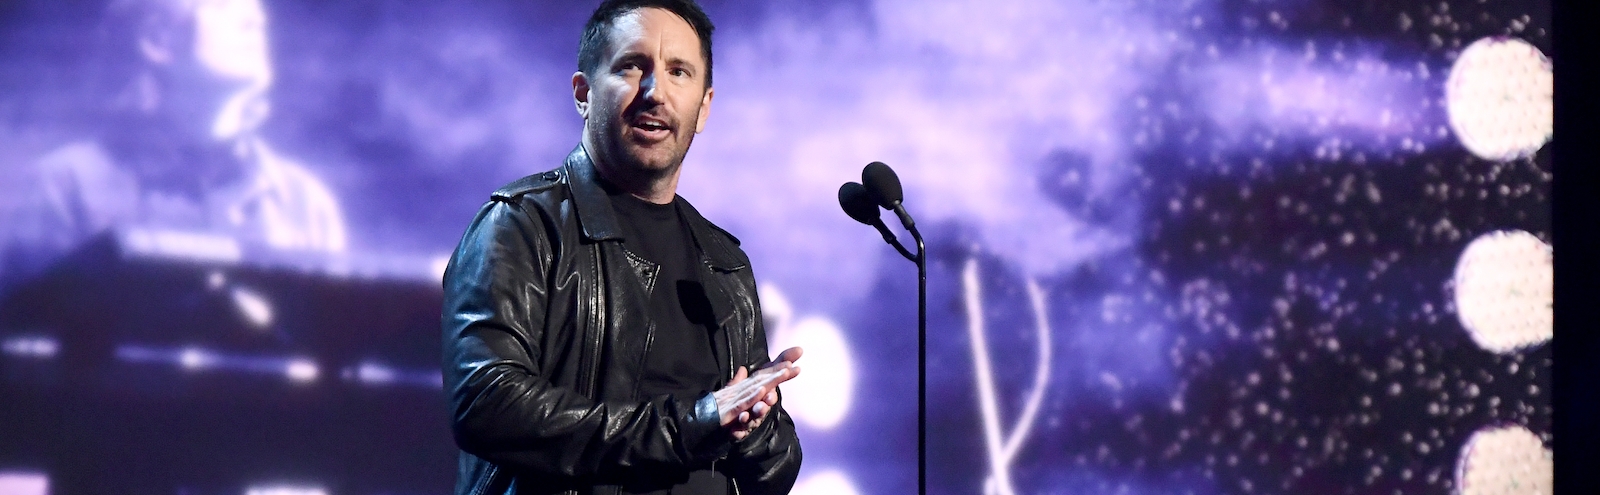 Trent Reznor Considered A New NIN Album, Instead Worked With Halsey